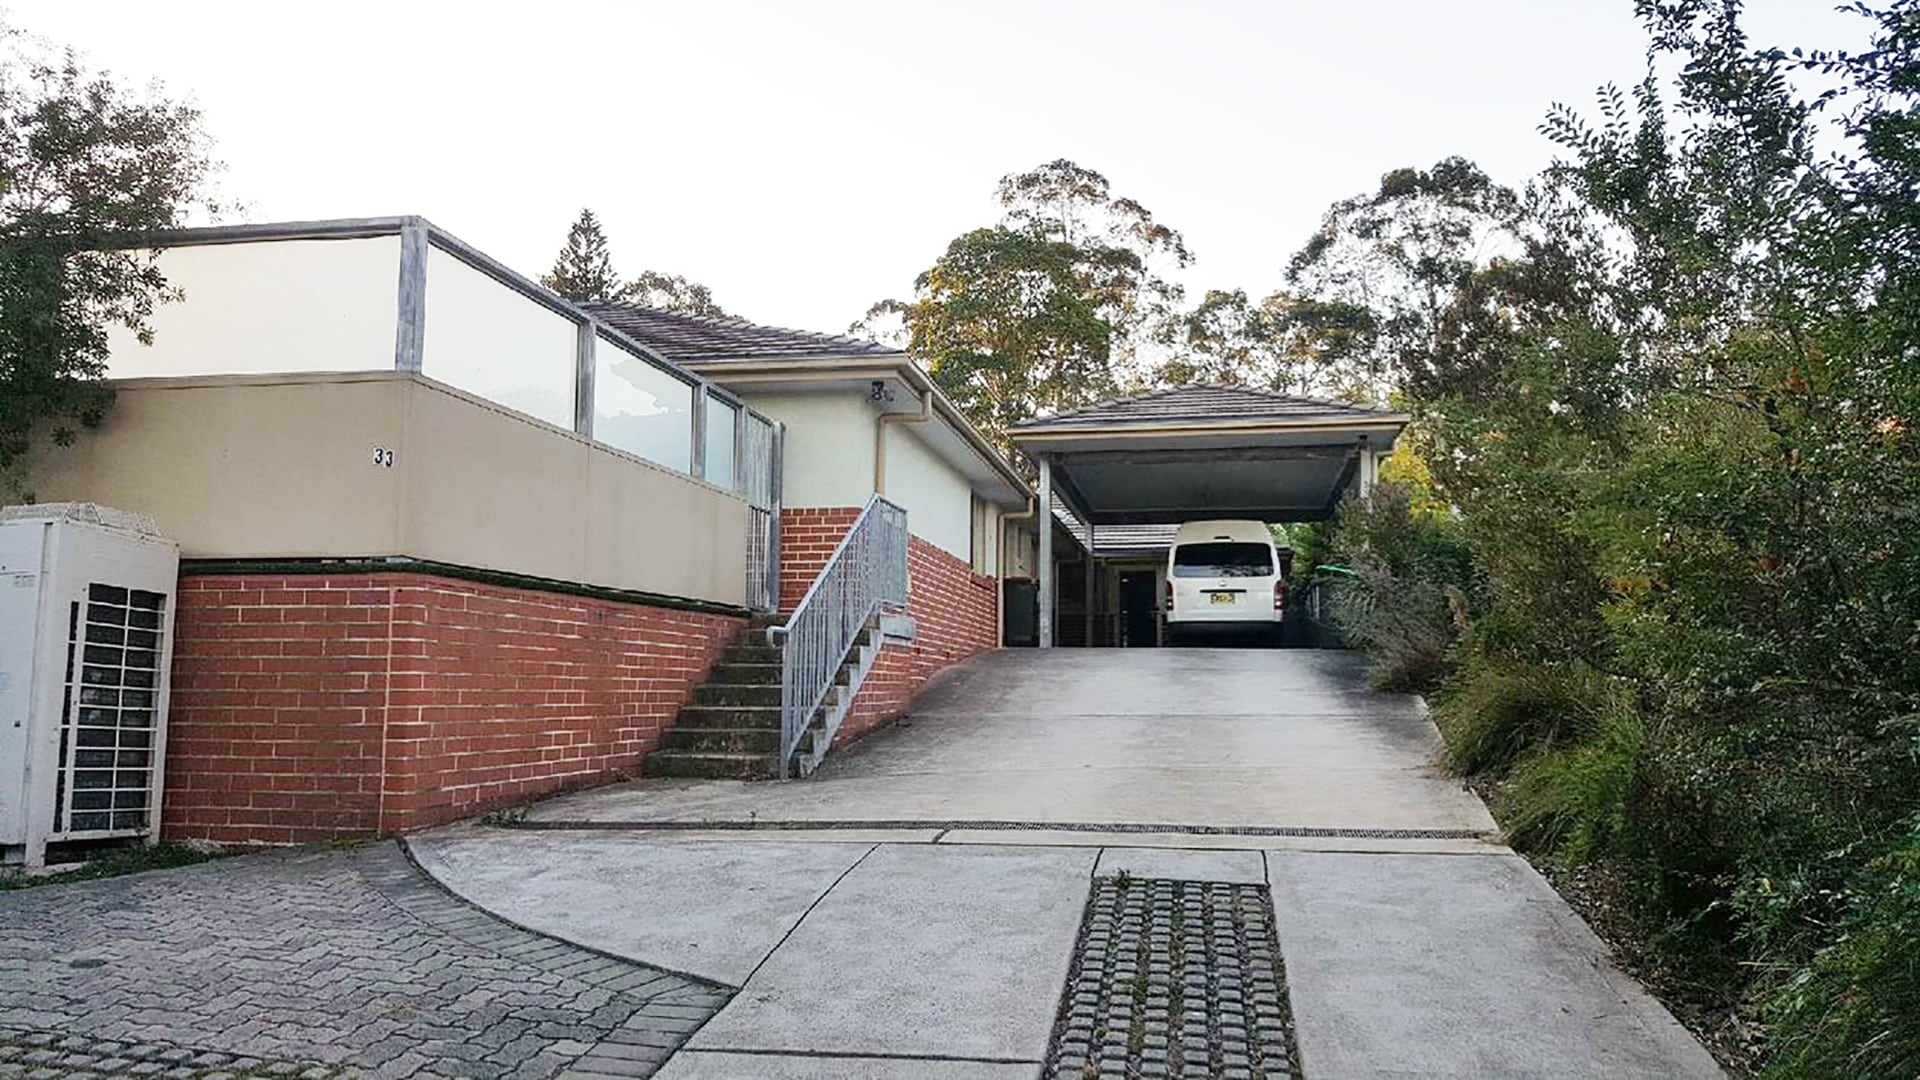 Front view of the house and long driveway at west Ryde 1